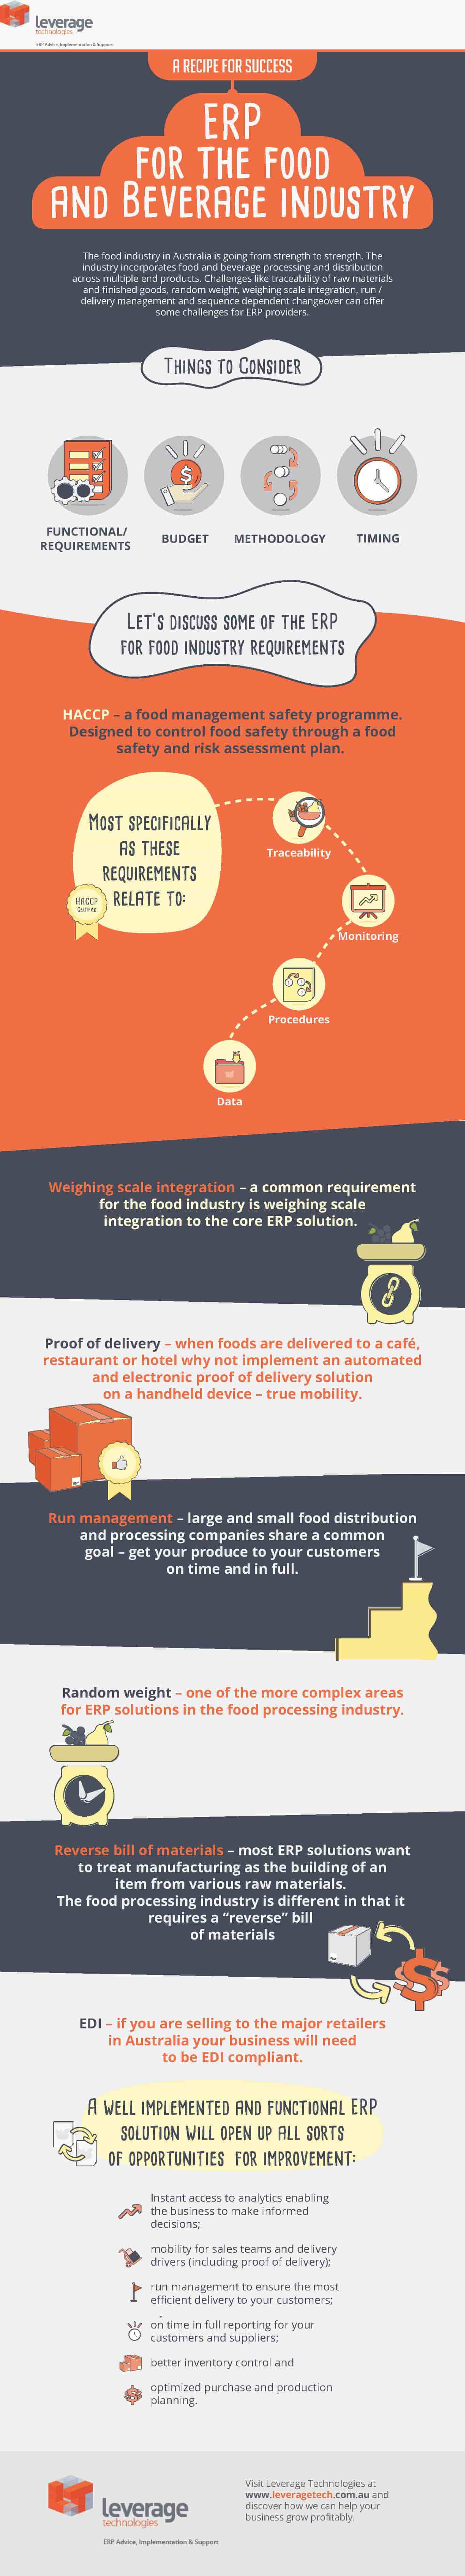 ERP for the Food Industry